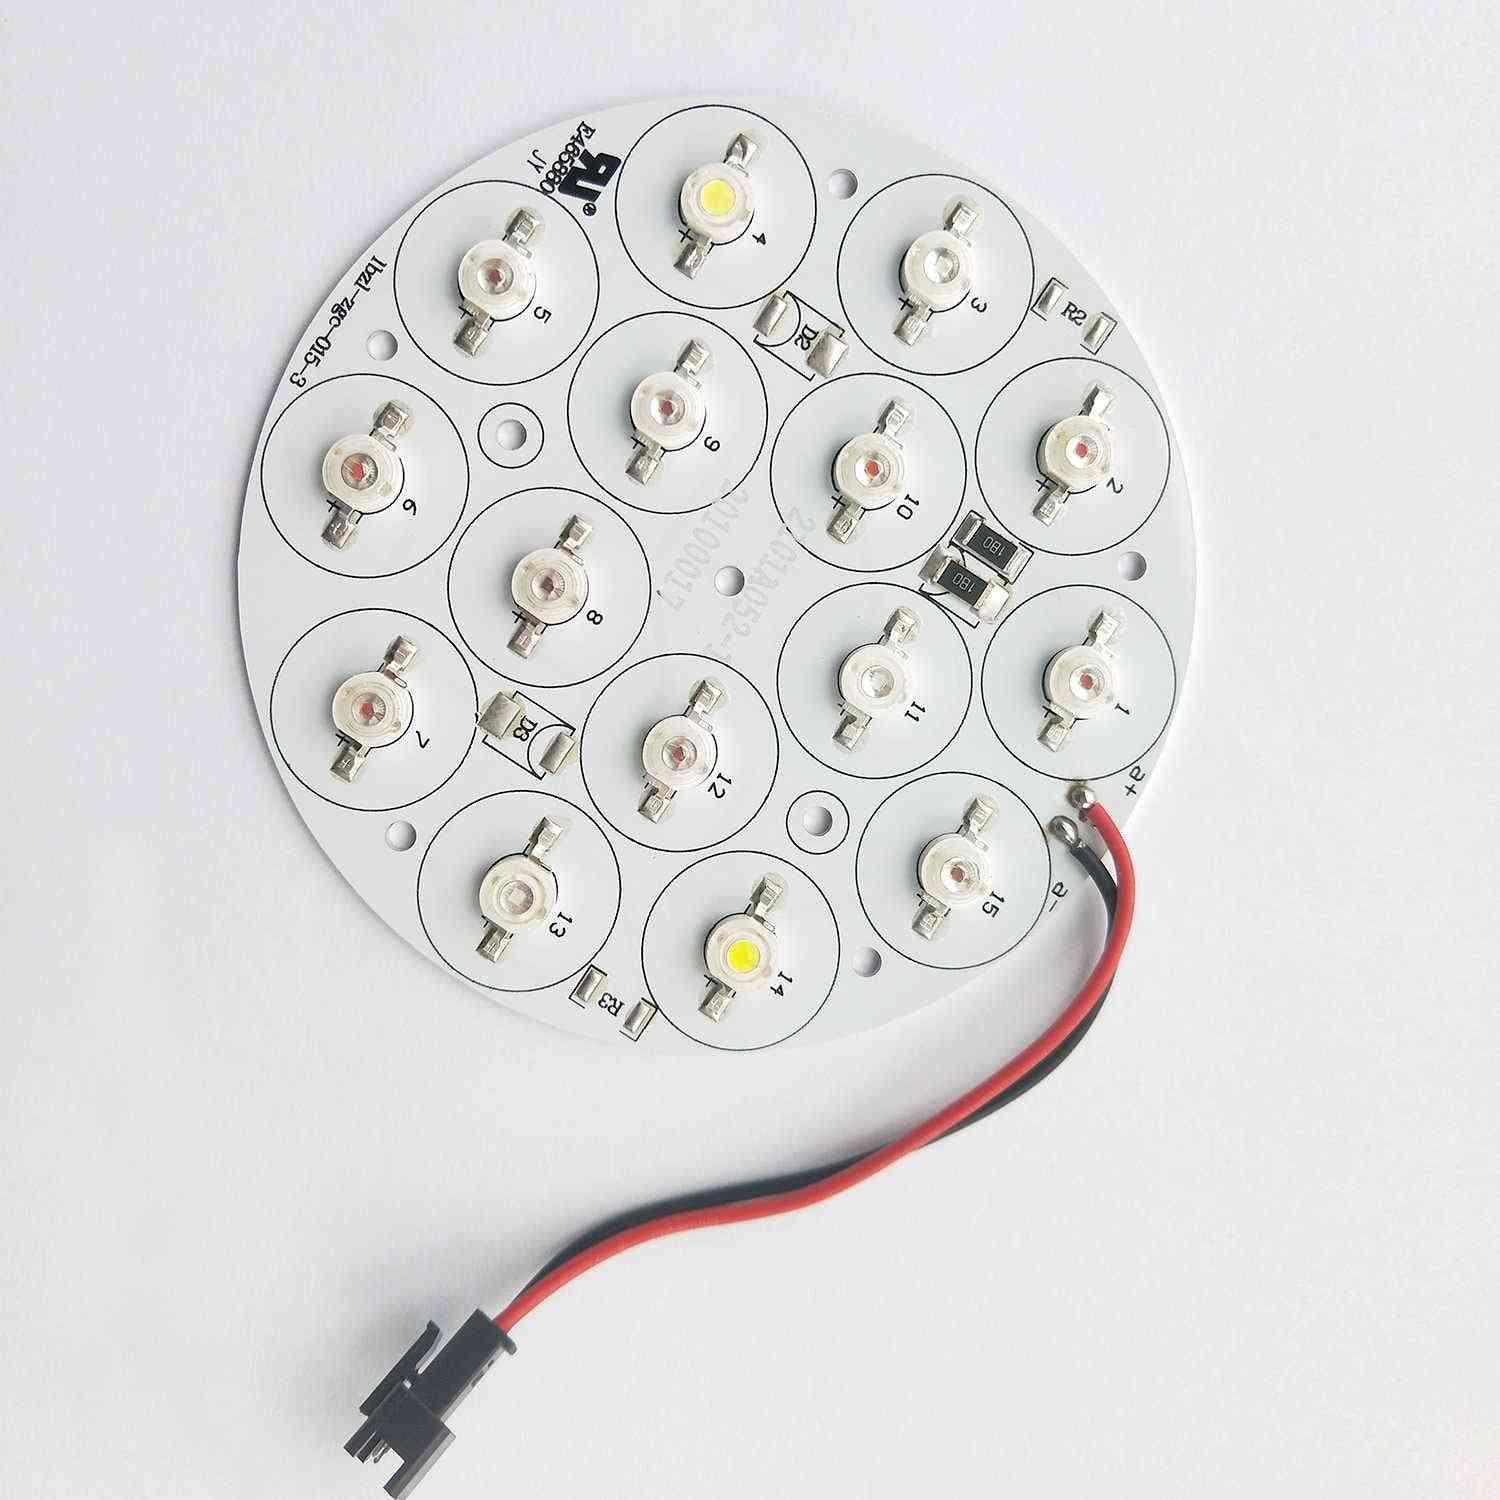 Cluster Replace Part- Led Grow Light, Plate Accessories